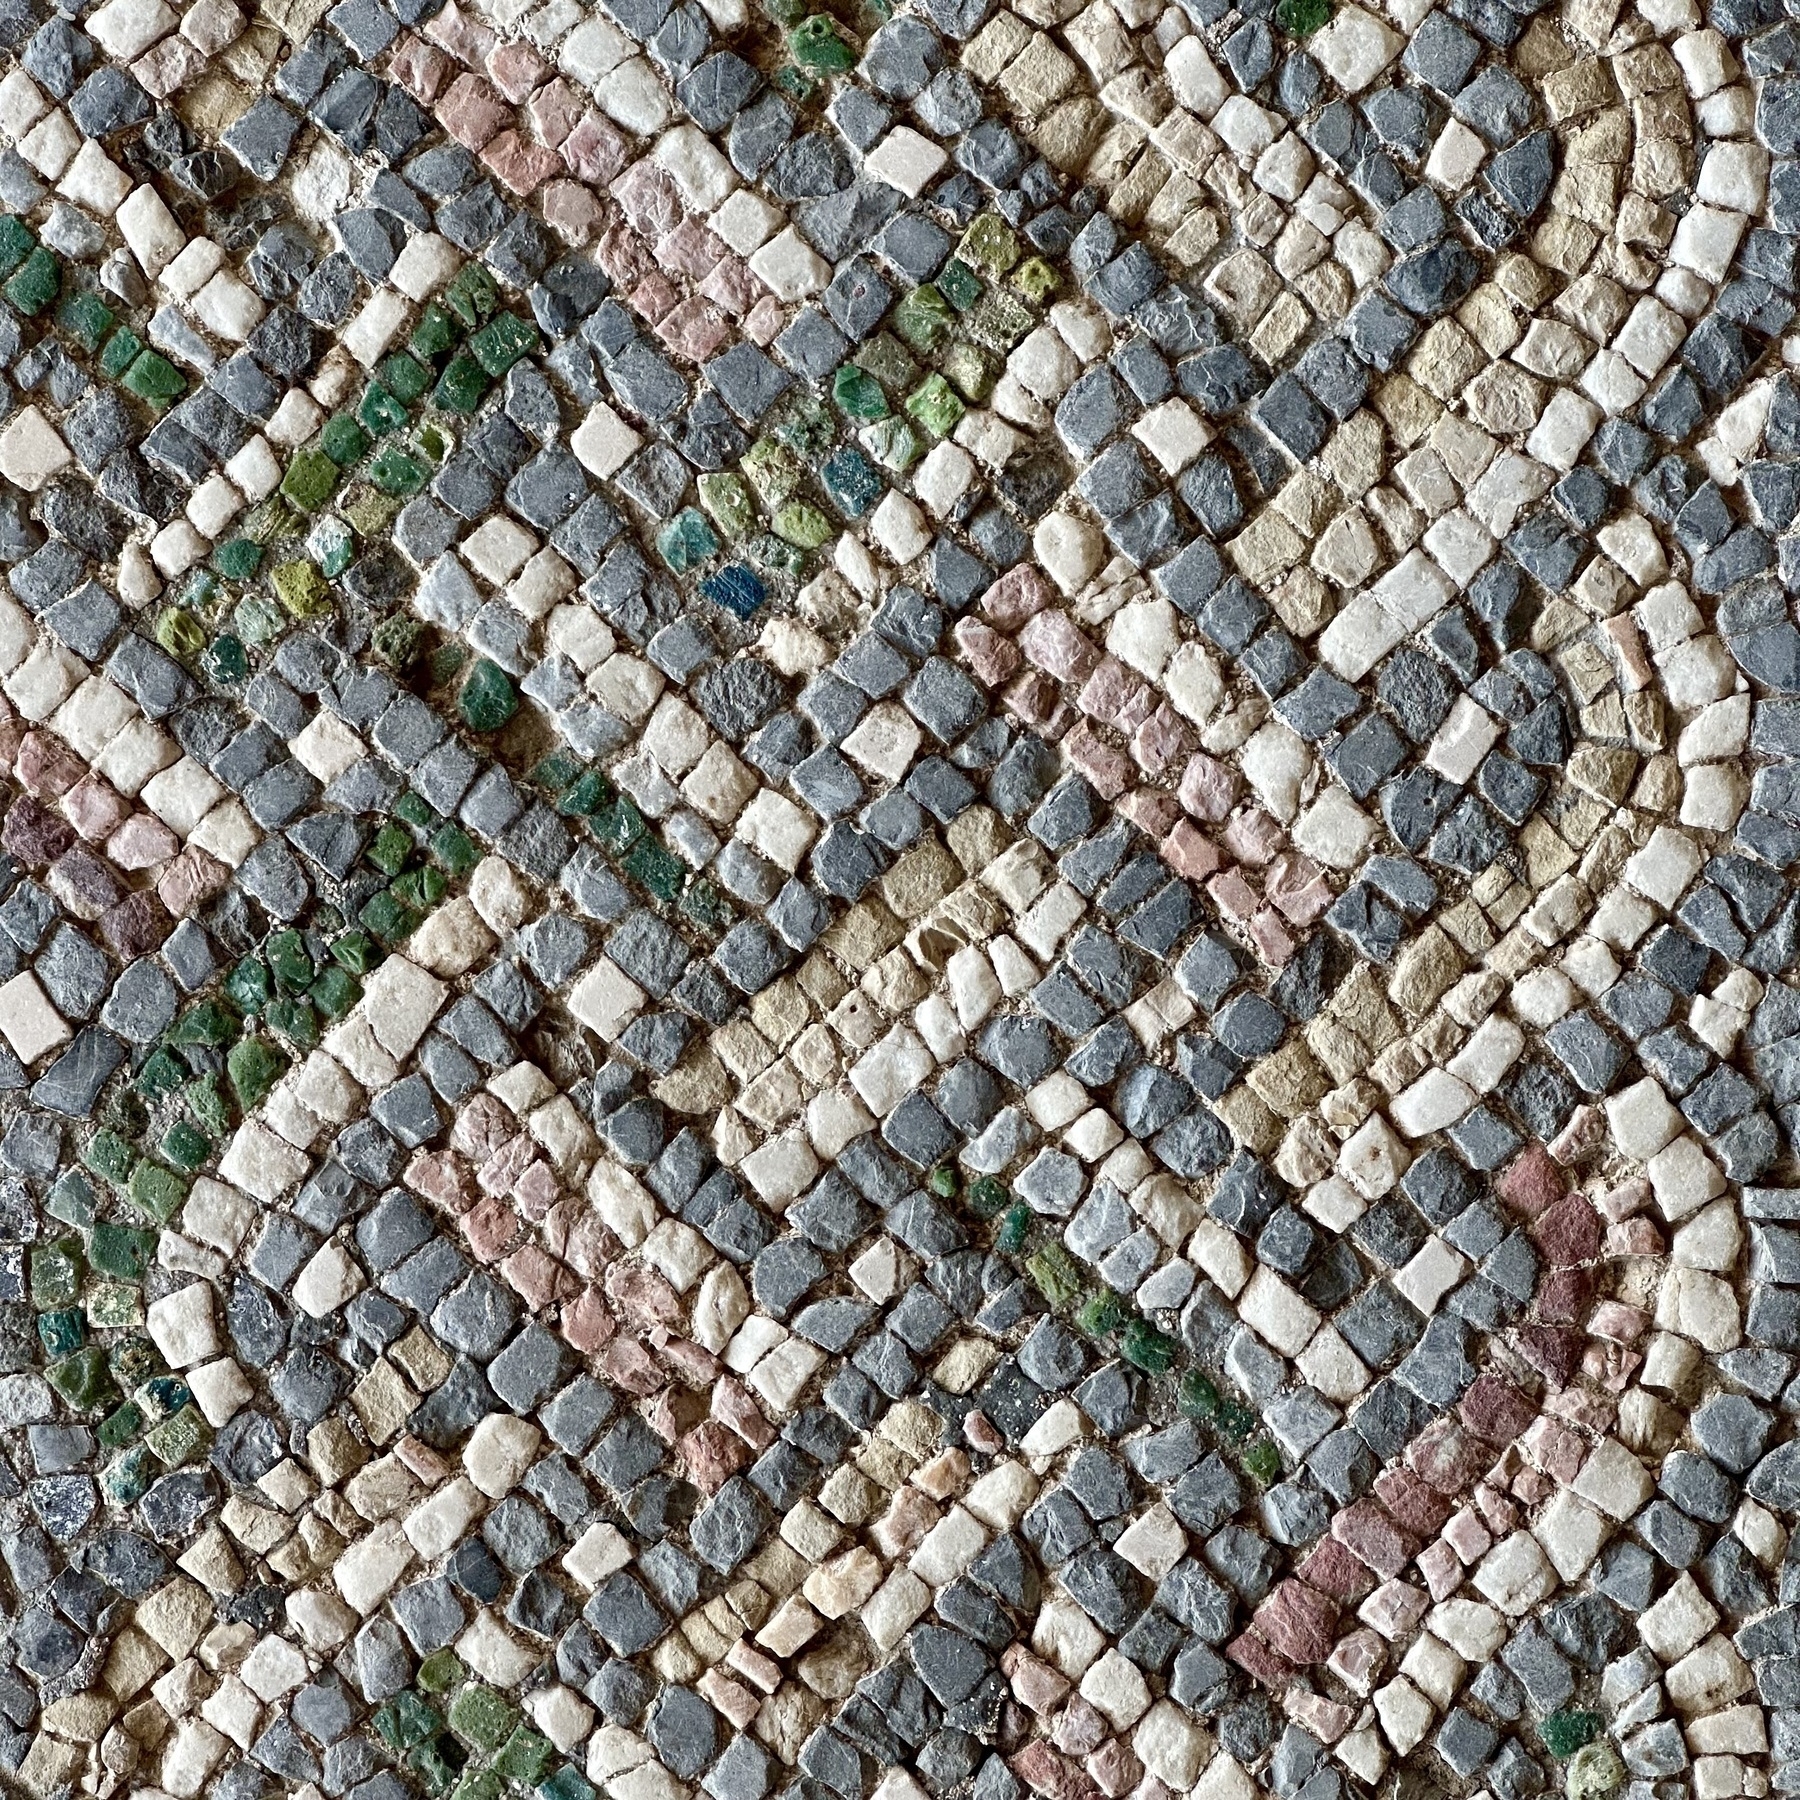 A geometric pattern mosaic of green, red, grey, and white tiles.